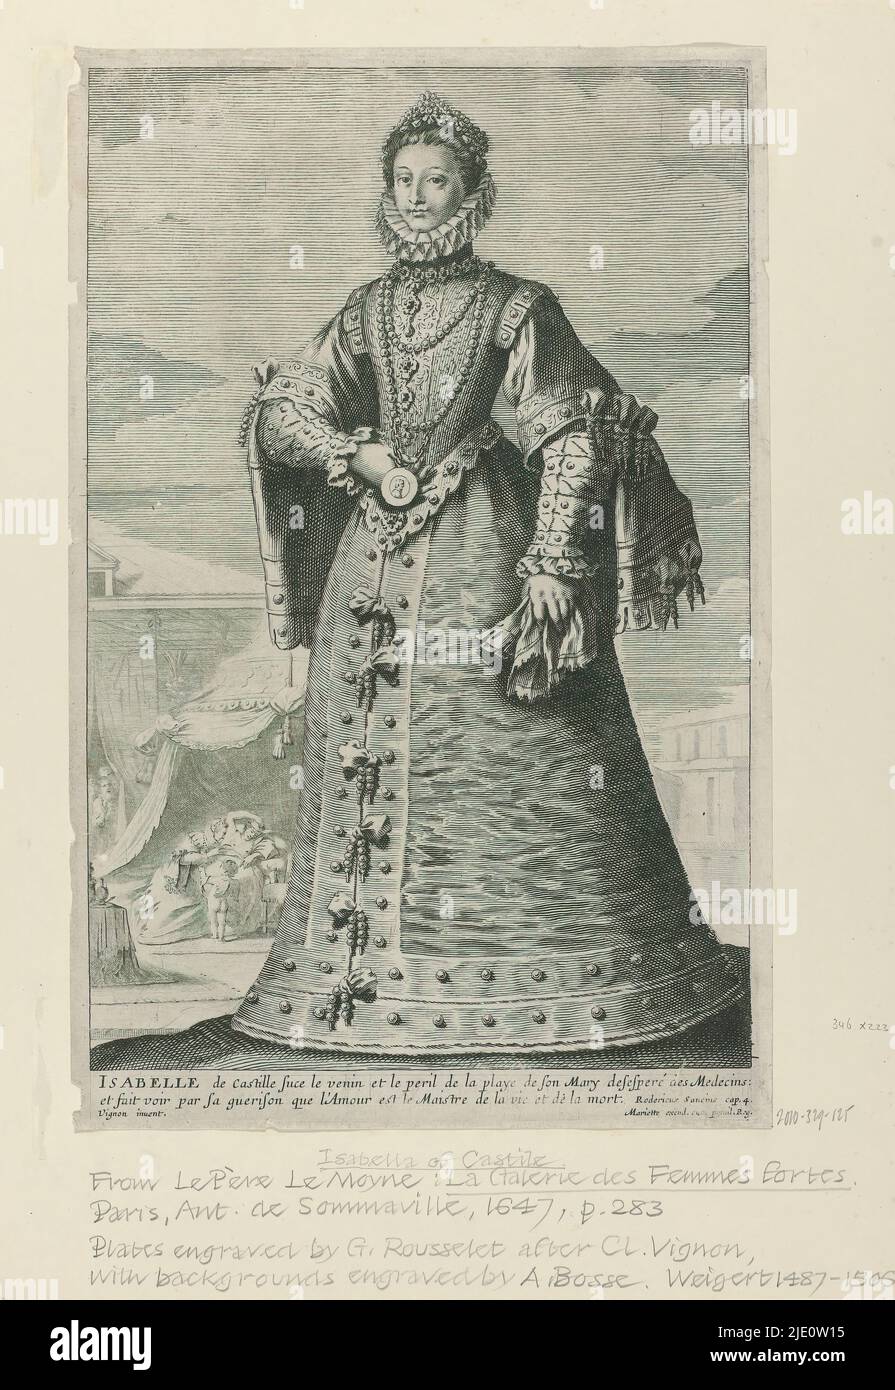 Portrait Isabella of Castile, print maker: Gilles Rousselet, (mentioned on object), print maker: Abraham Bosse, after design by: Claude Vignon, (mentioned on object), France, 1647, paper, engraving, etching, height 346 mm × width 223 mm Stock Photo